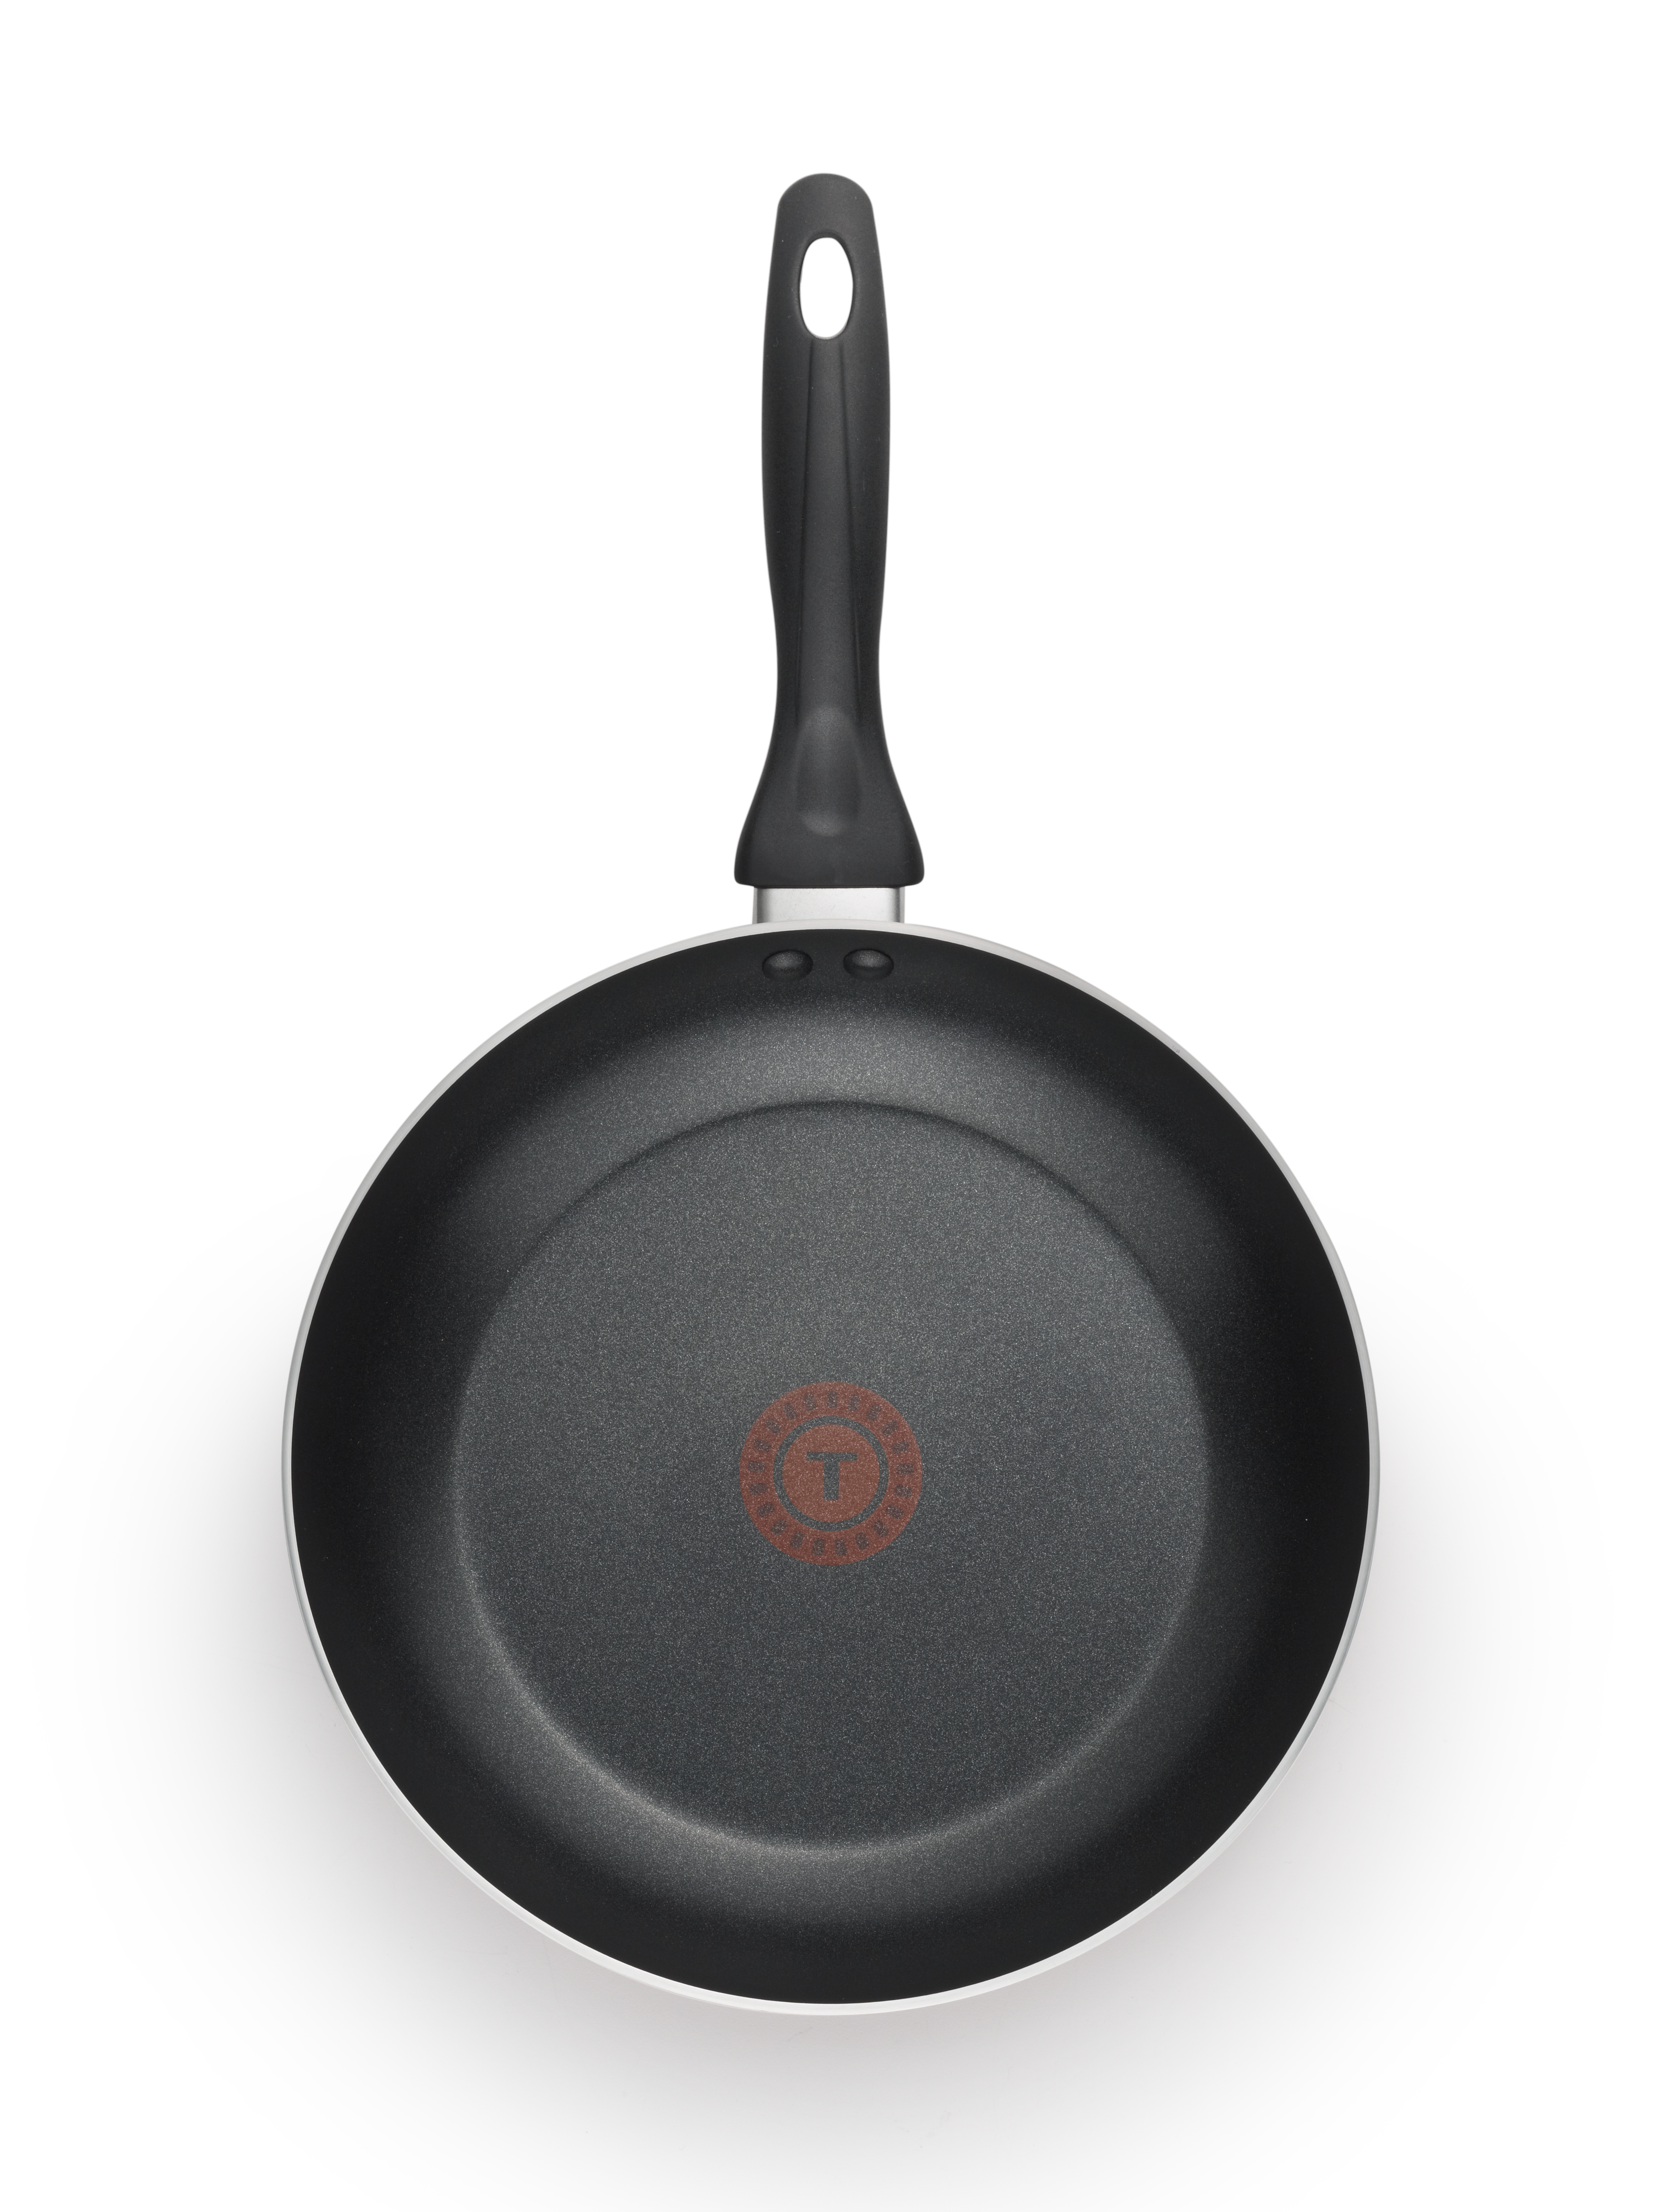 T-fal Easy Care 8" Nonstick Frypan, Black - image 4 of 7